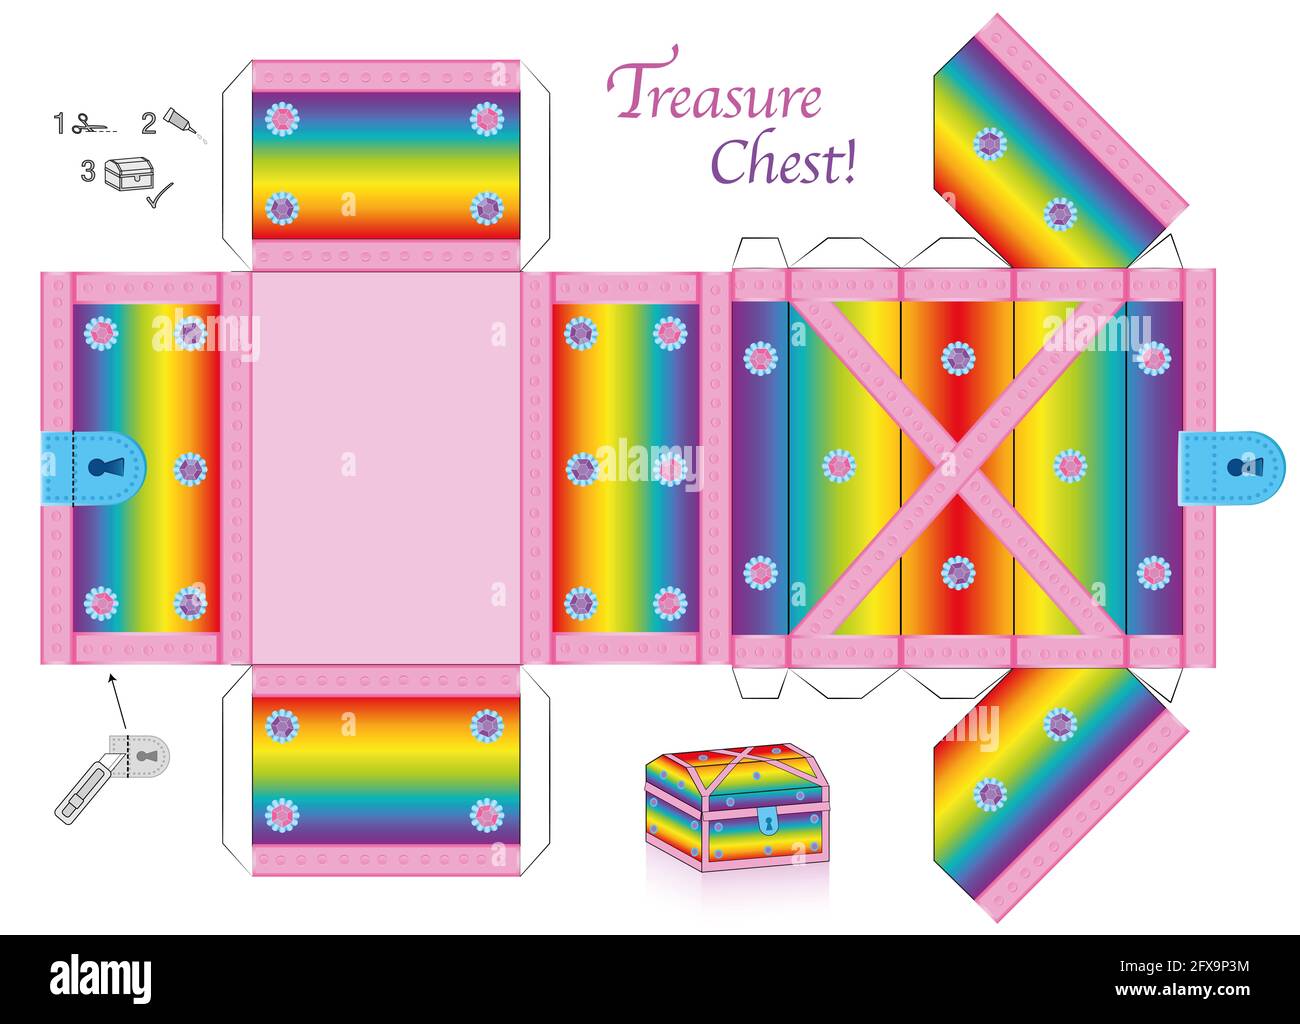 Treasure chest template. Rainbow colored paper model. Cut out, fold and glue it. With lid that can be opened. Colorful box for precious objects. Stock Photo